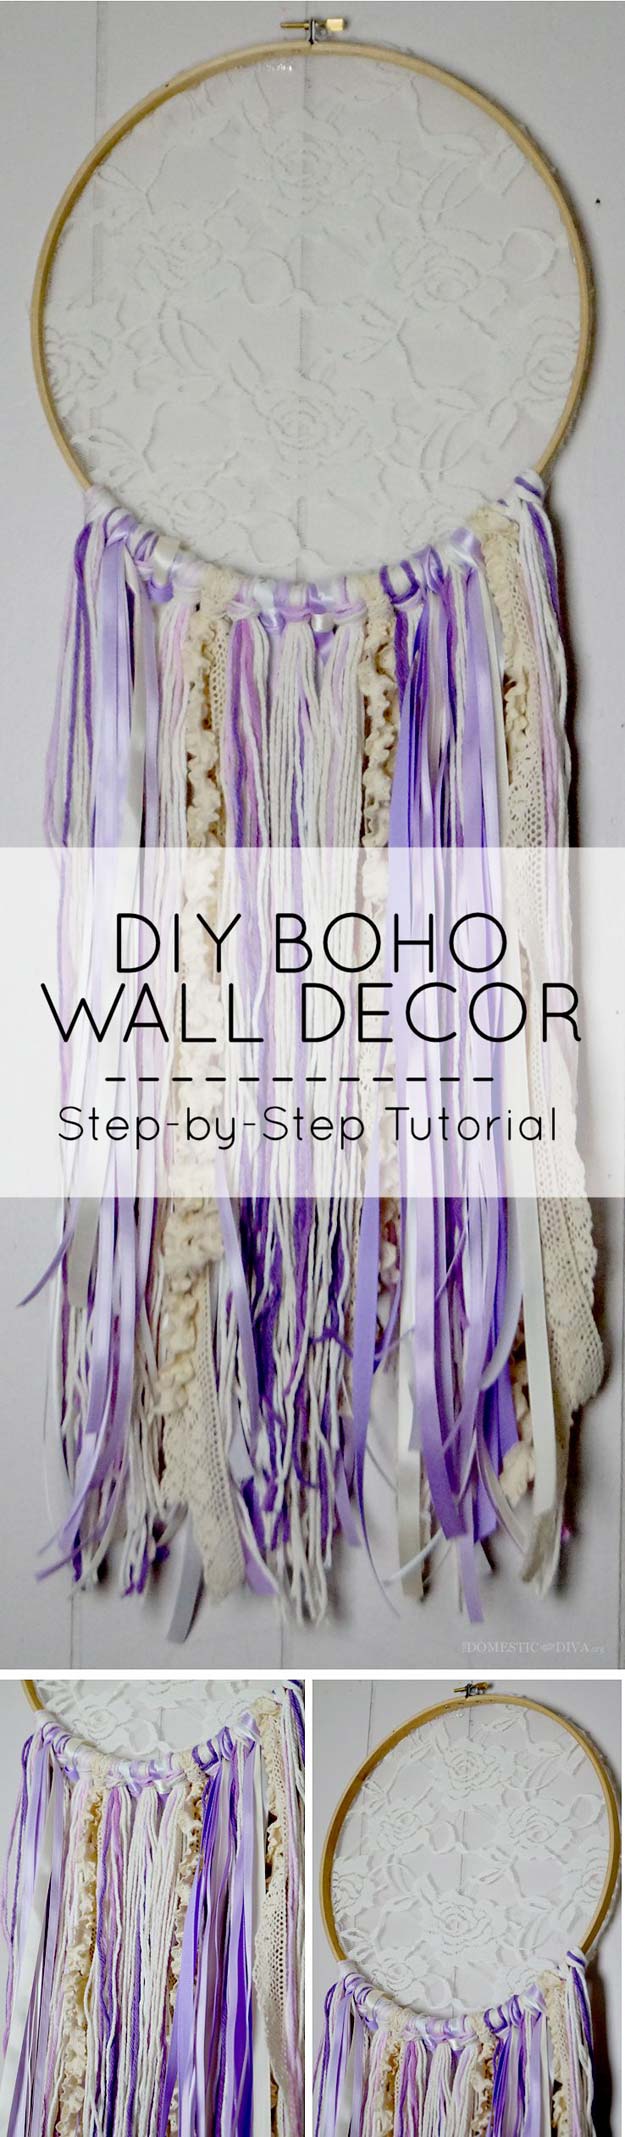 DIY Purple Room Decor - DIY Boho Wall Decor - Best Bedroom Ideas and Projects in Purple - Cool Accessories, Crafts, Wall Art, Lamps, Rugs, Pillows for Adults, Teen and Girls Room 